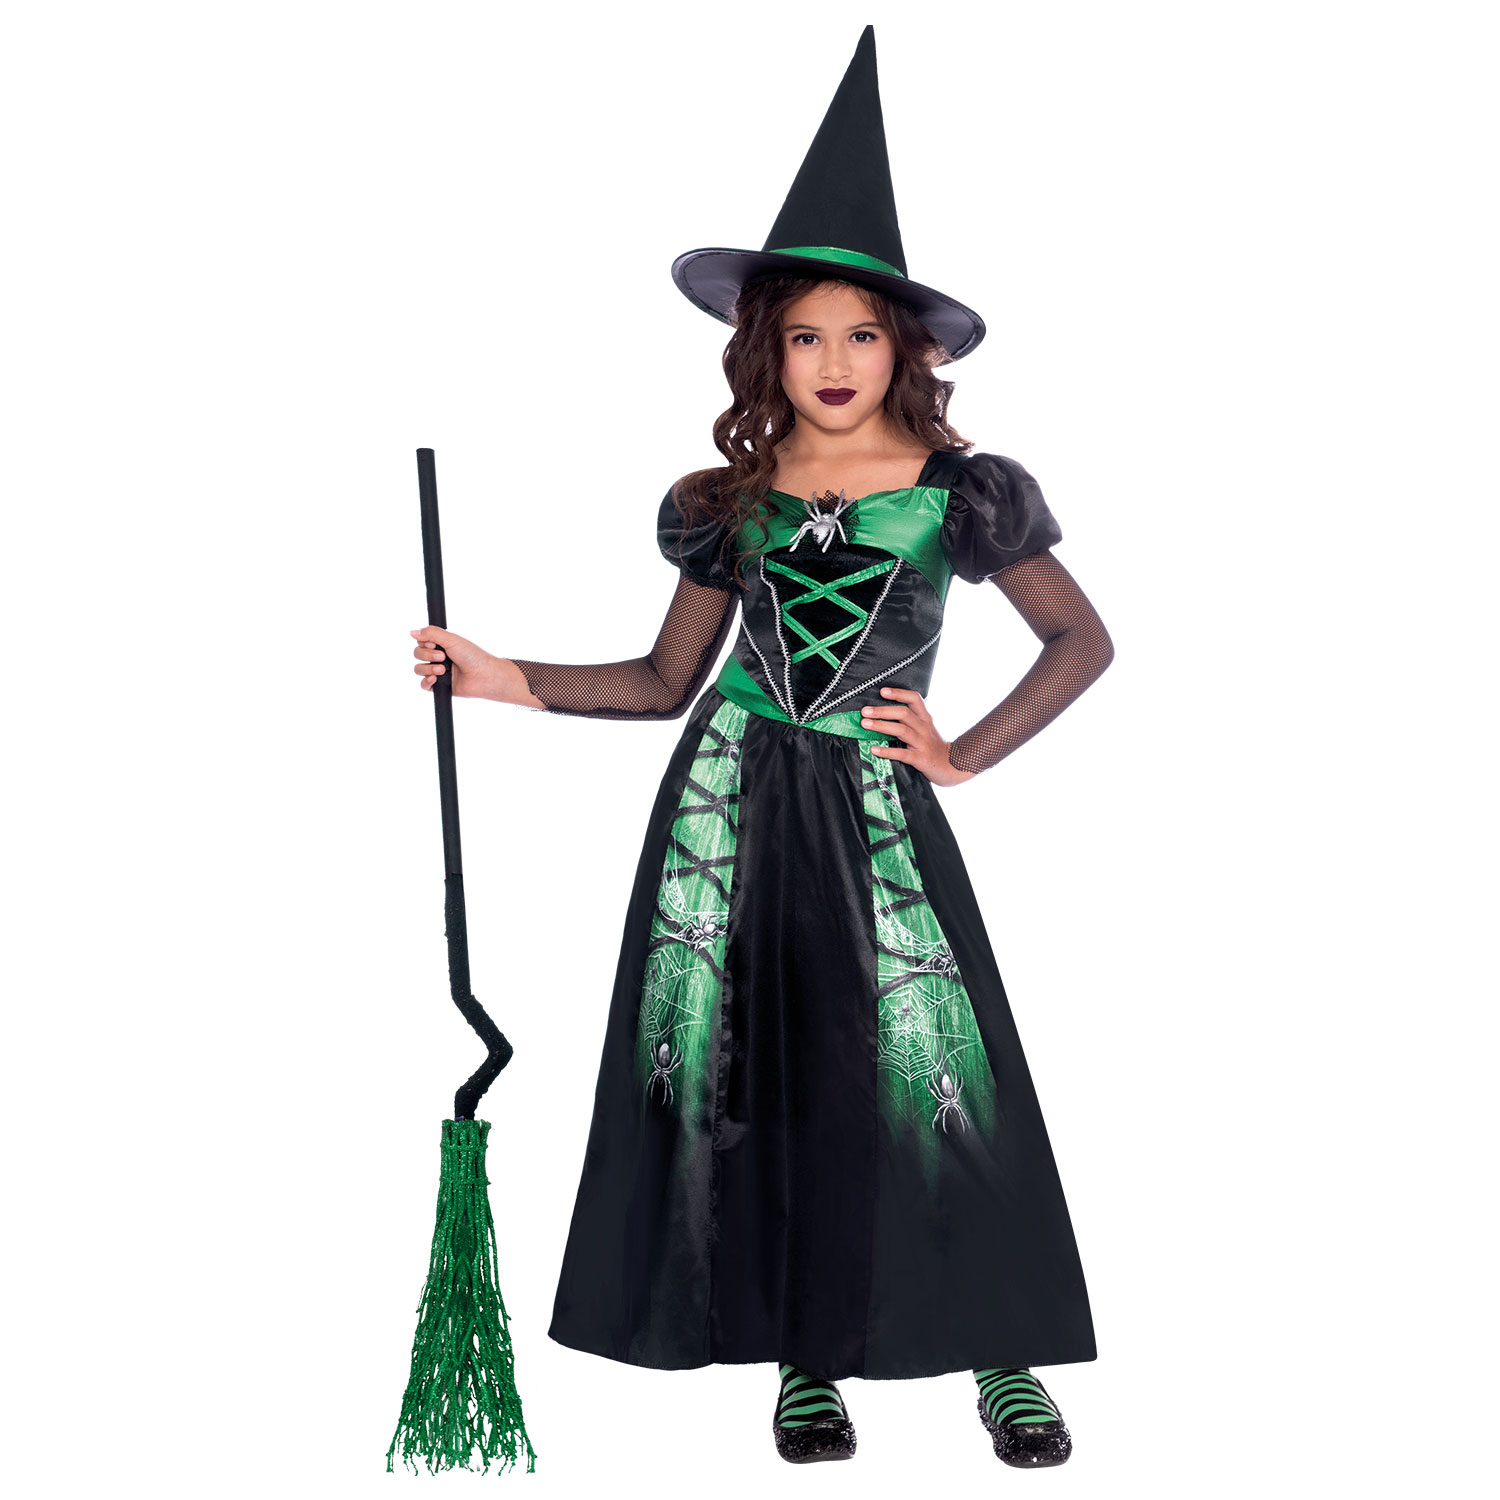 Spider Witch Costume - Age 3-4 Years - 1 PC : Amscan International